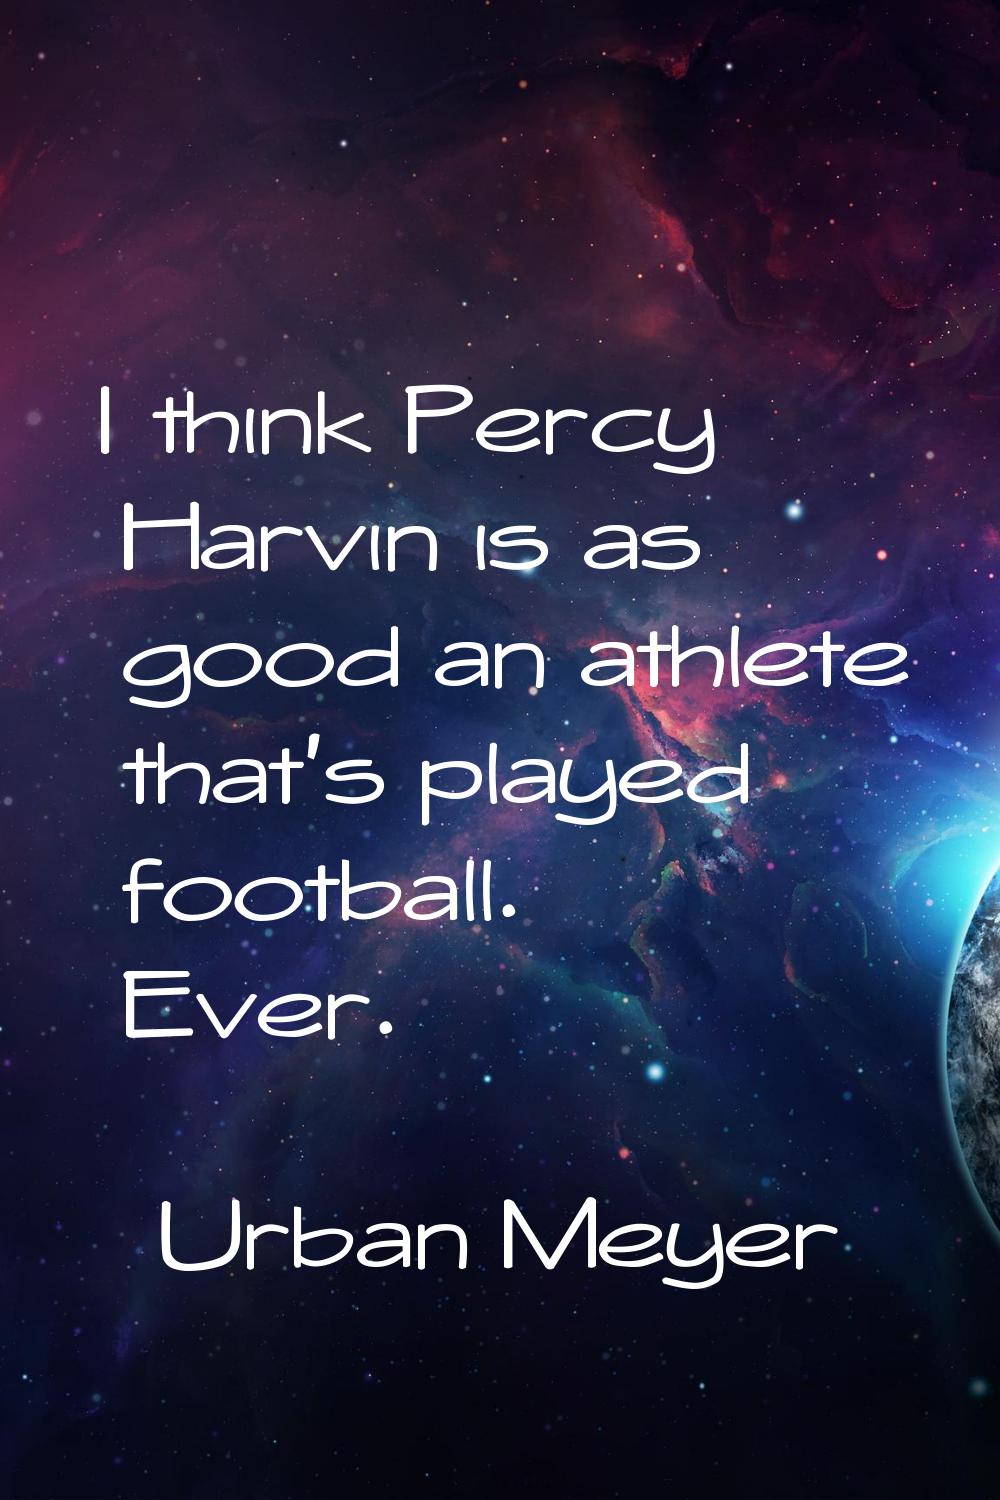 I think Percy Harvin is as good an athlete that's played football. Ever.